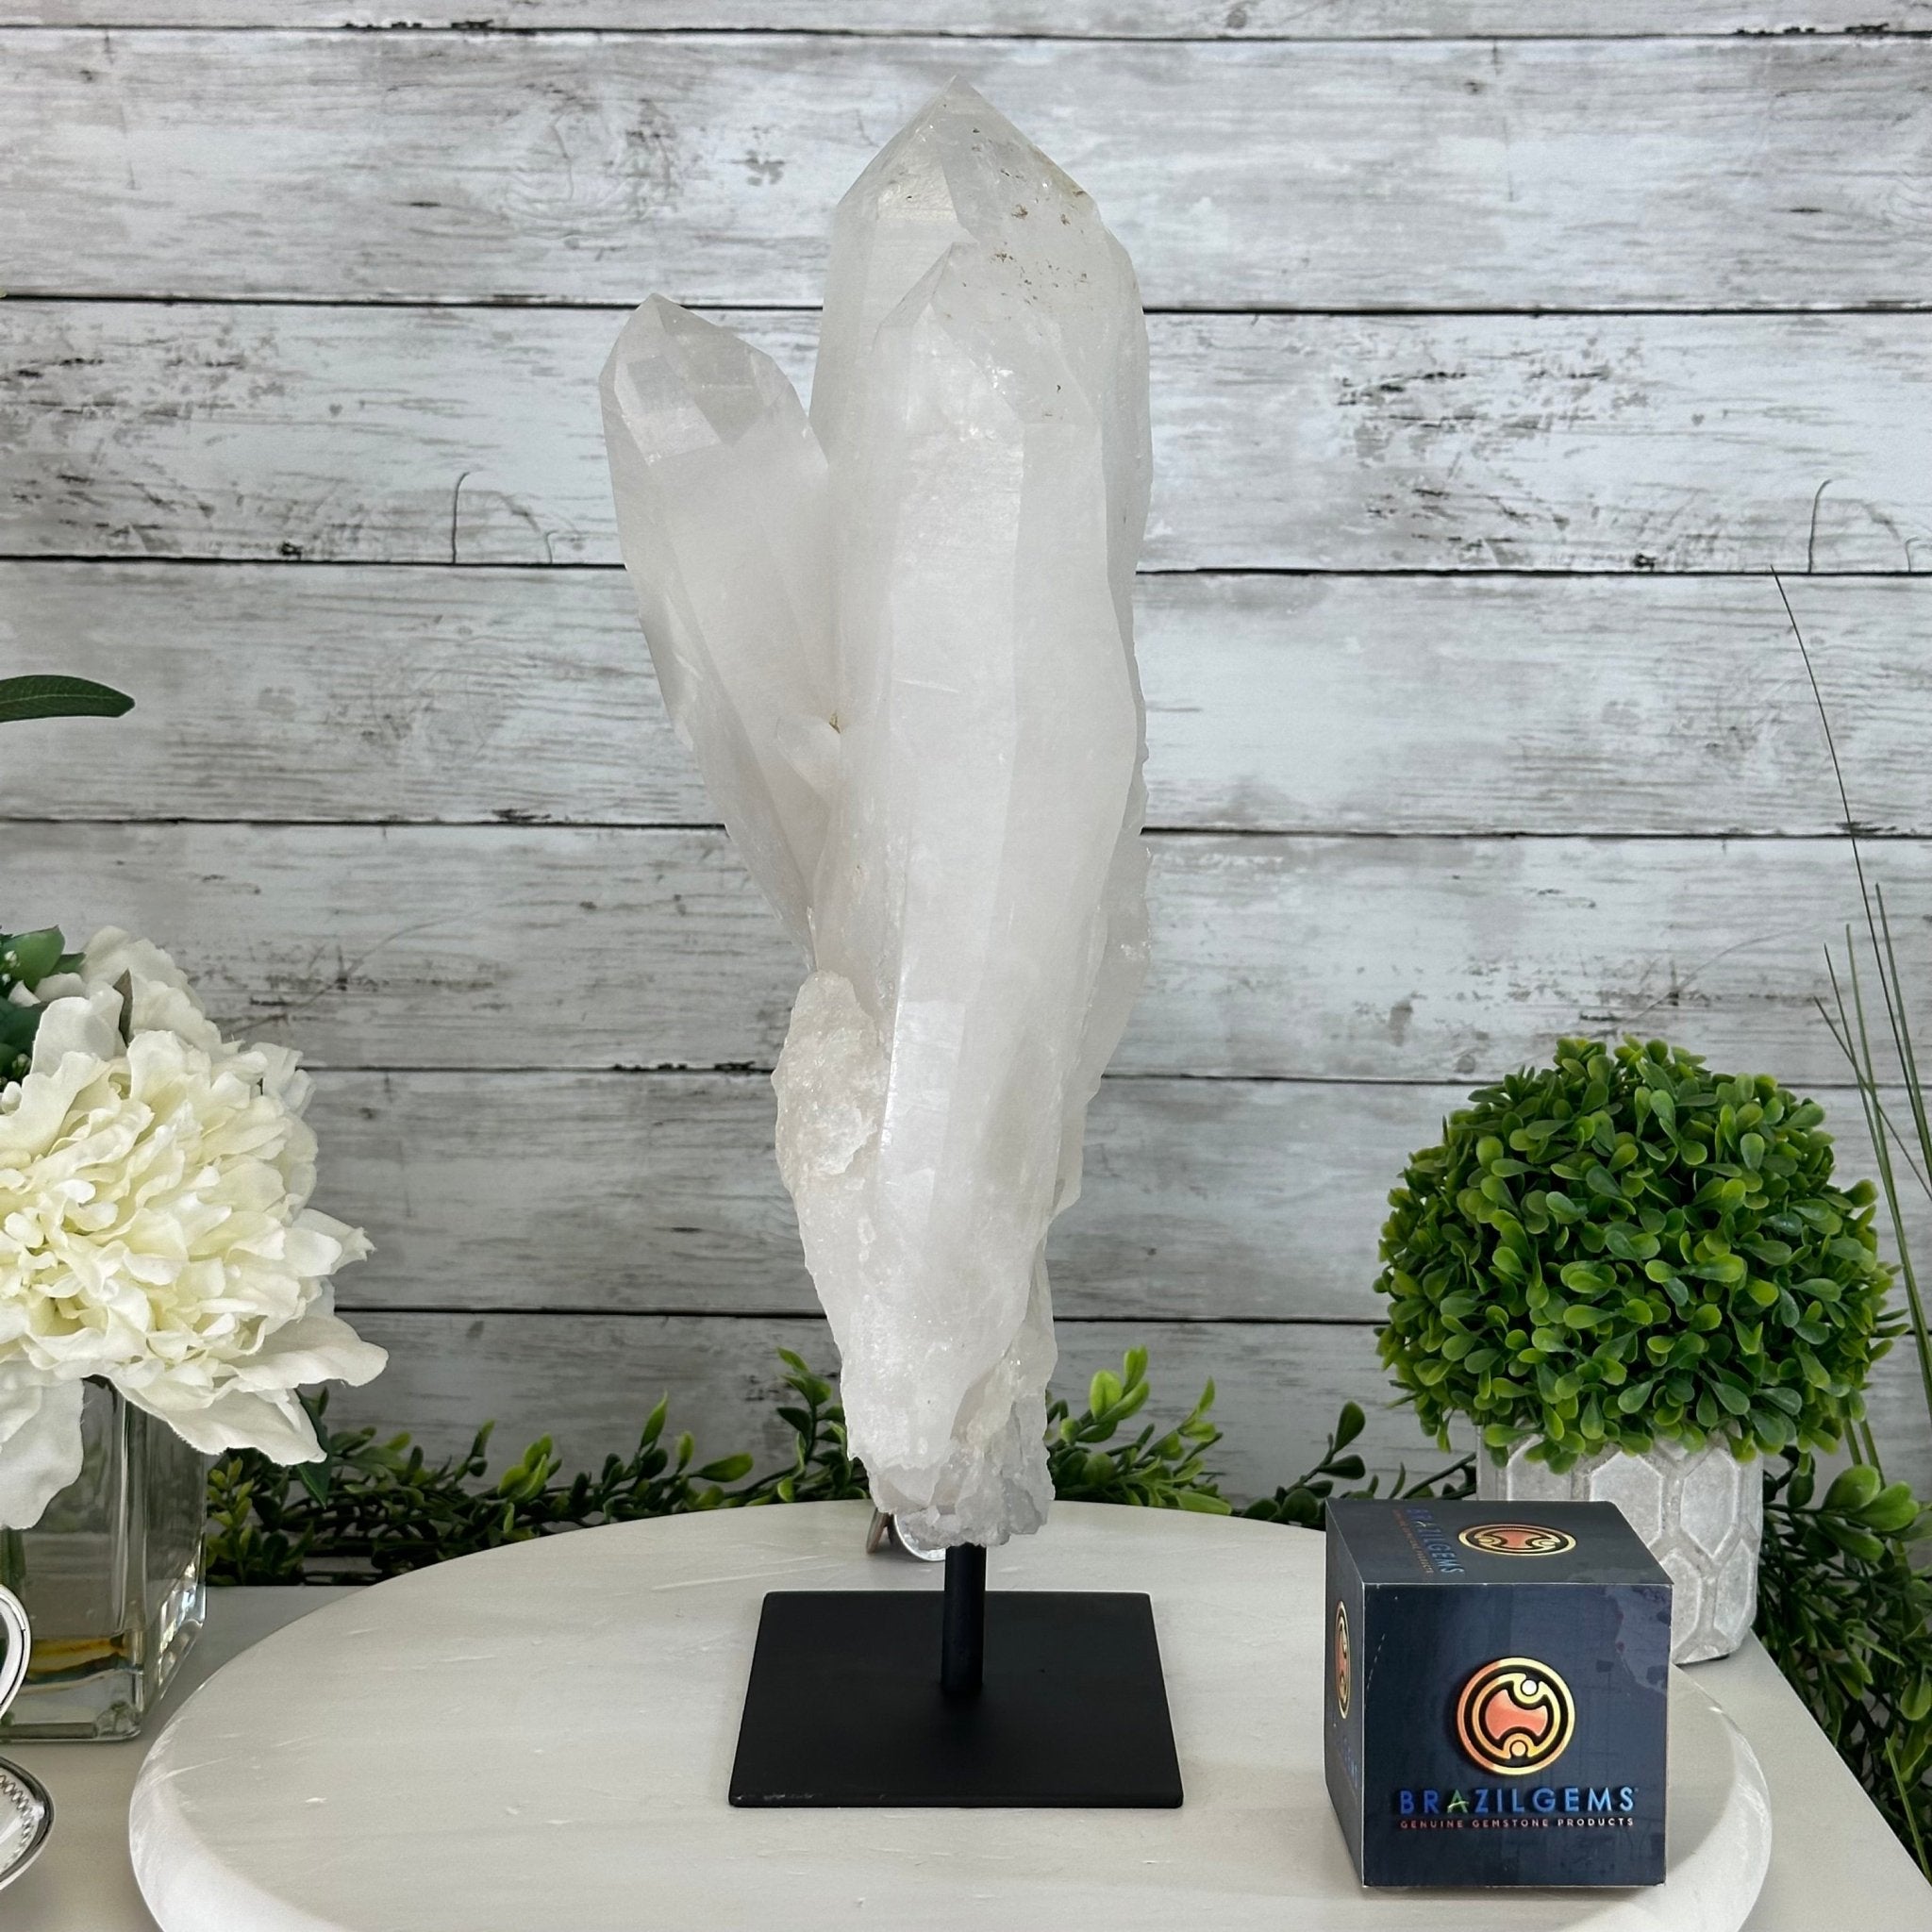 Clear Quartz Crystal Point on Fixed Base, 13.5 lbs & 15.1" Tall #3122CQ-012 - Brazil GemsBrazil GemsClear Quartz Crystal Point on Fixed Base, 13.5 lbs & 15.1" Tall #3122CQ-012Crystal Points3122CQ-012